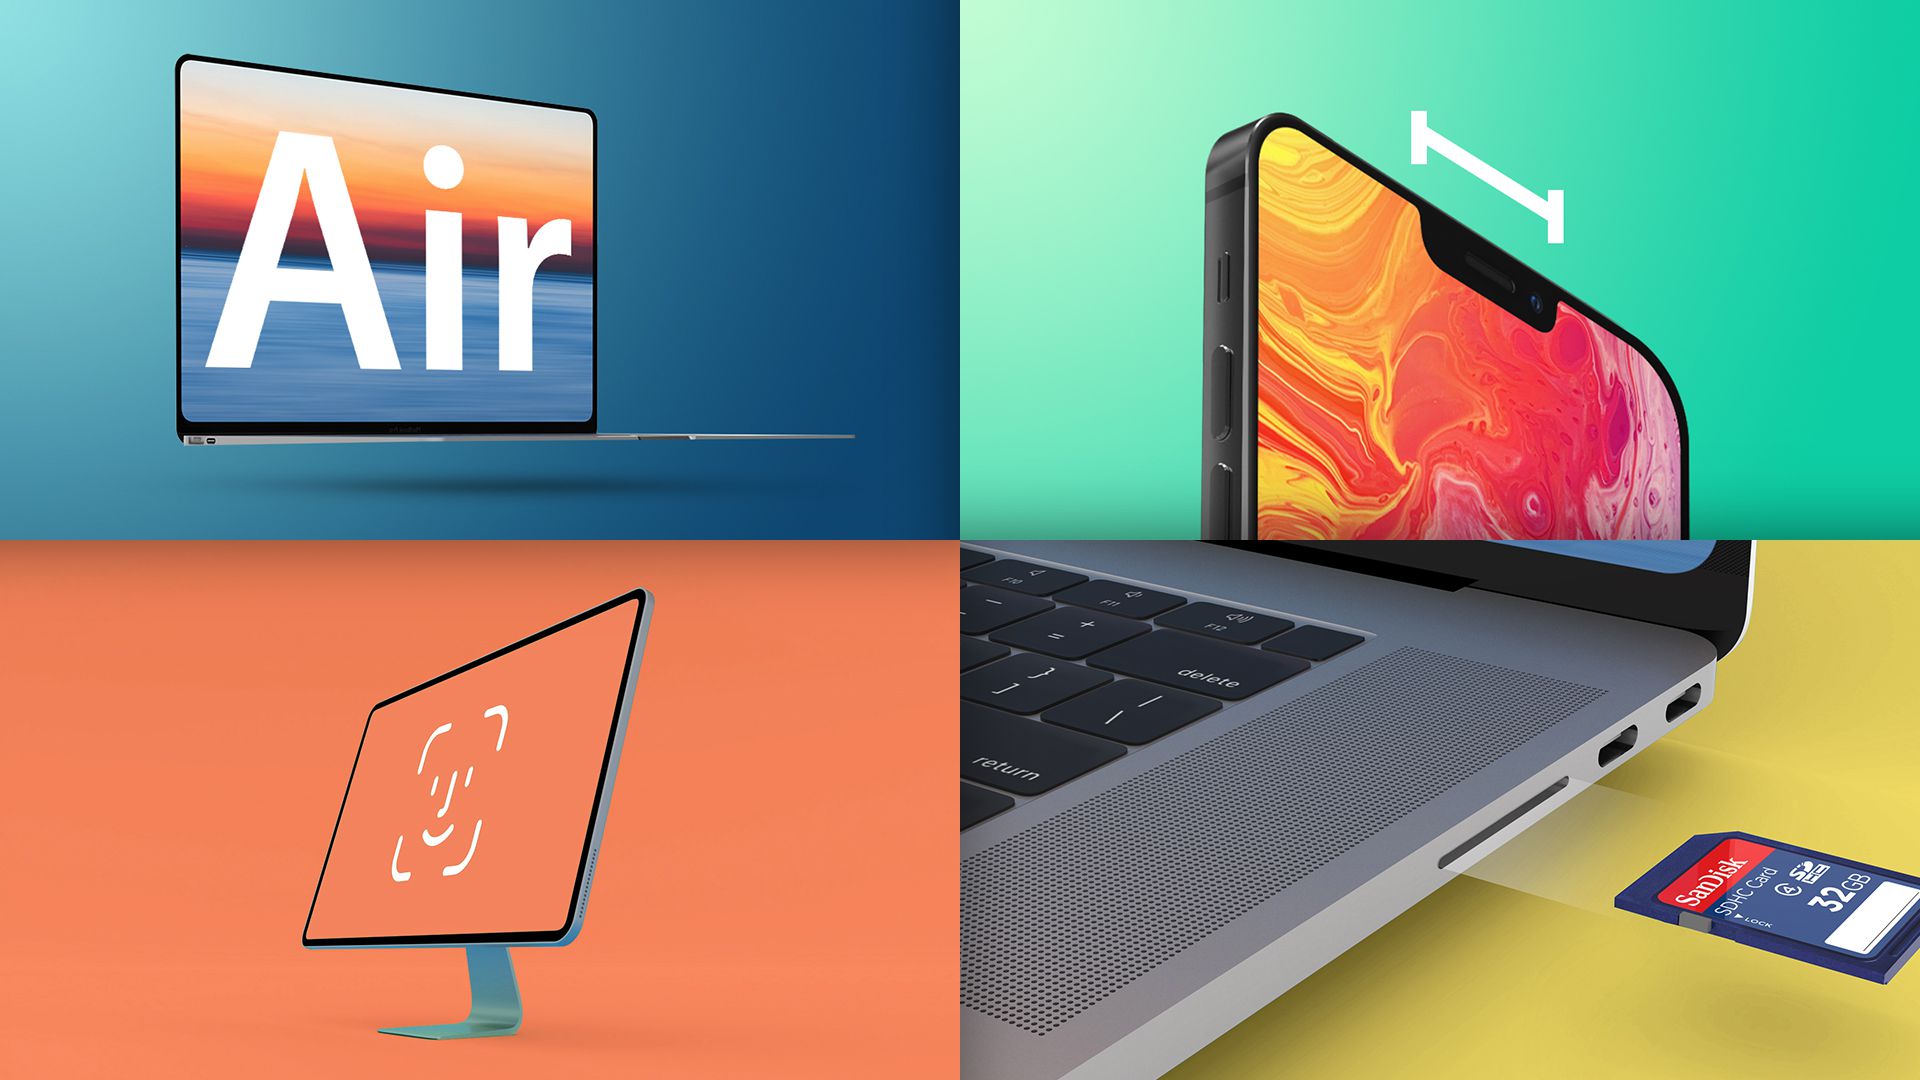 Headline news: MacBook Air is 'thinner and lighter', iPhone 13 is smaller, iOS 14.4 in